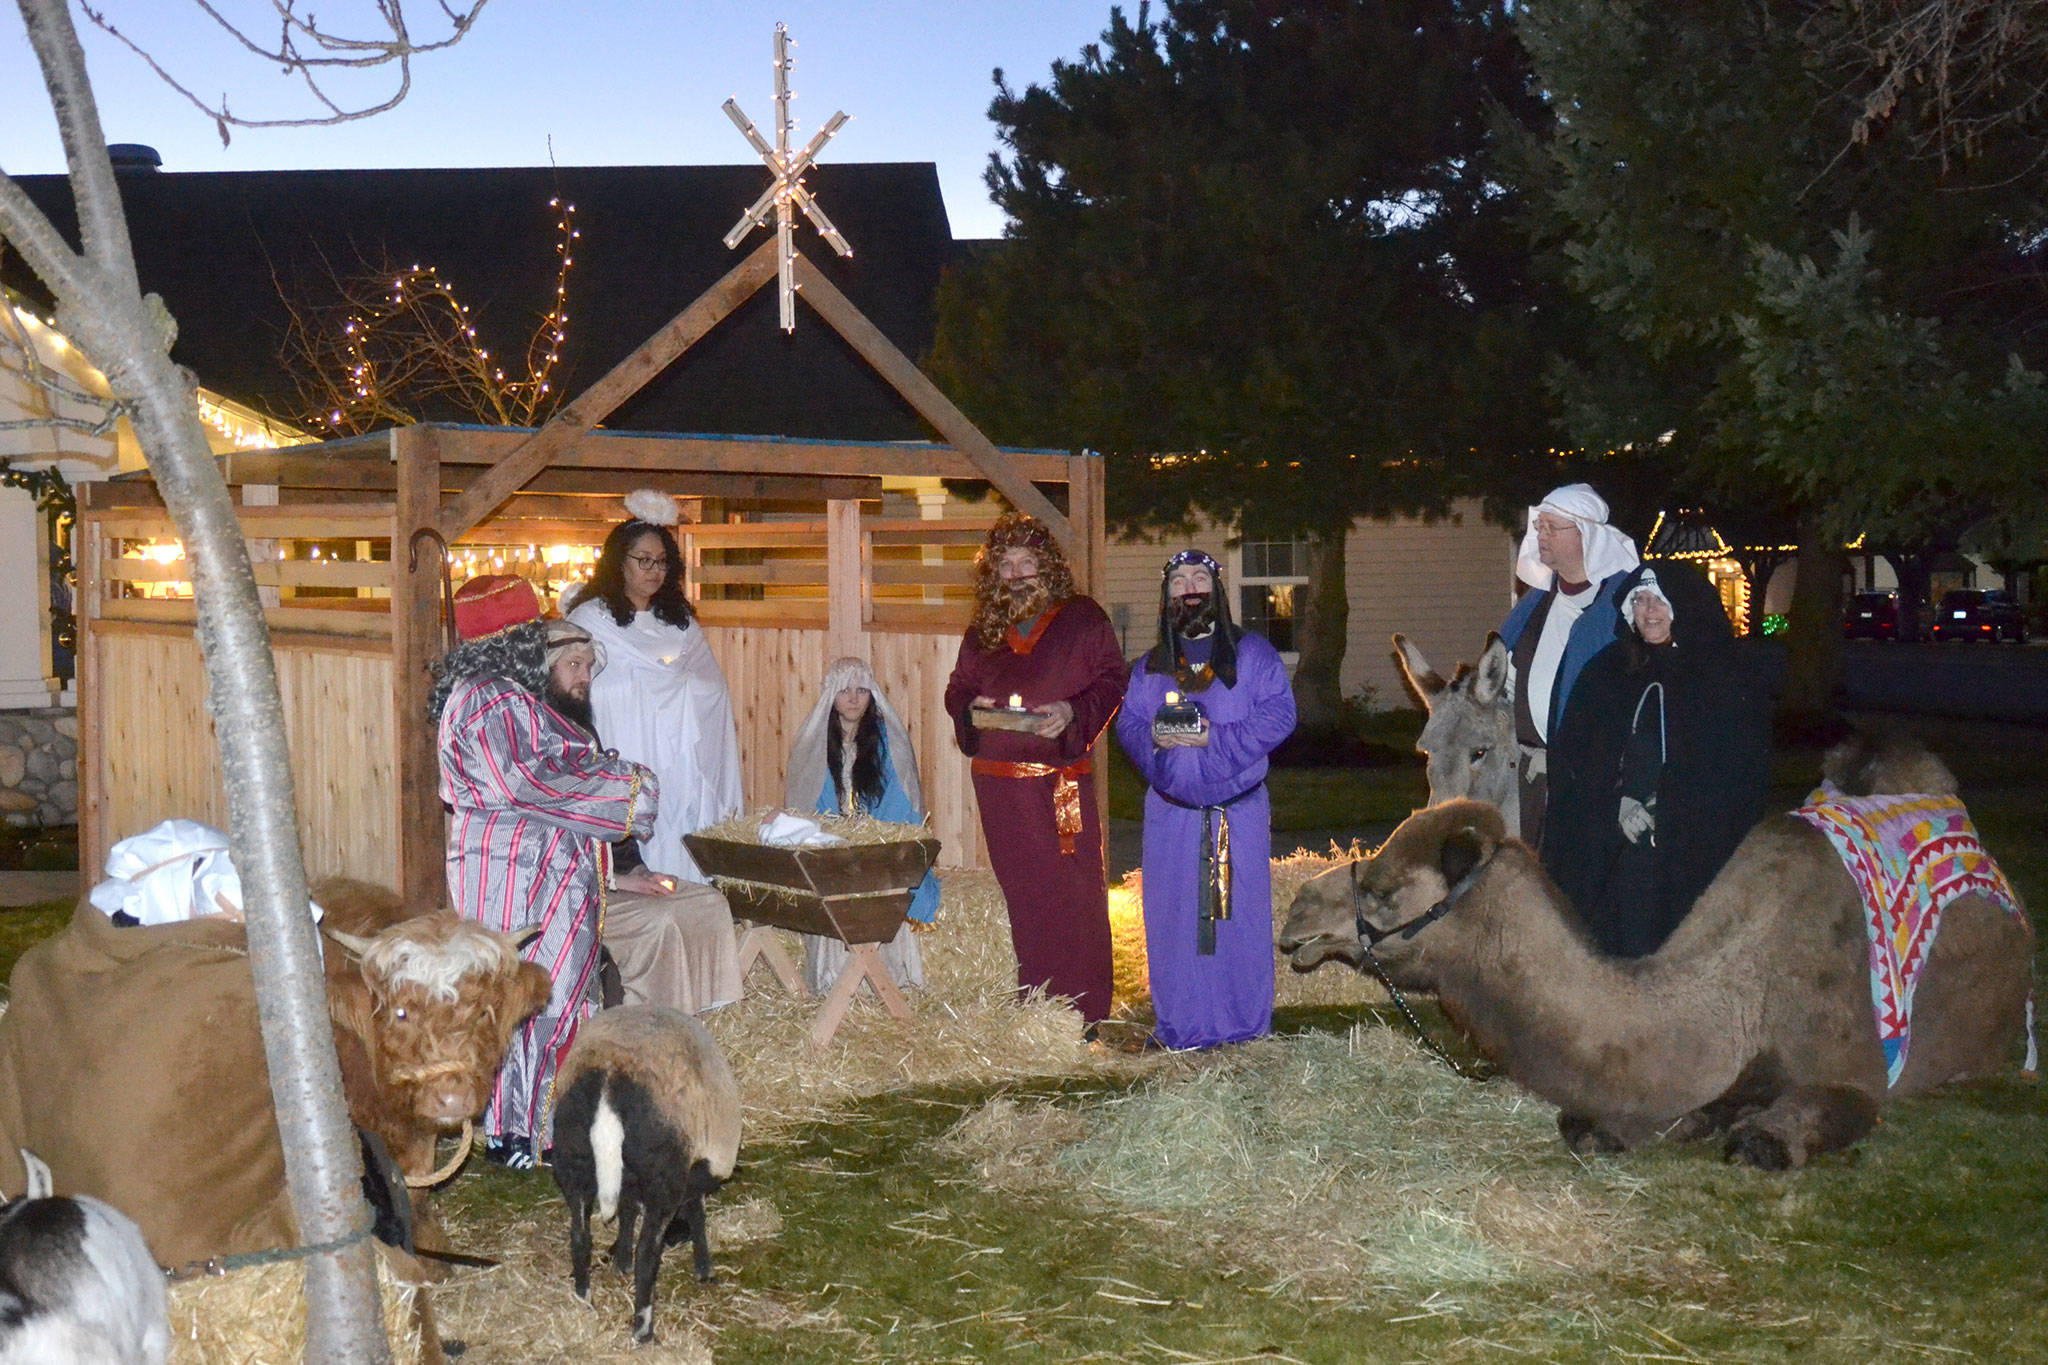 Dungeness Courte goes live with the nativity